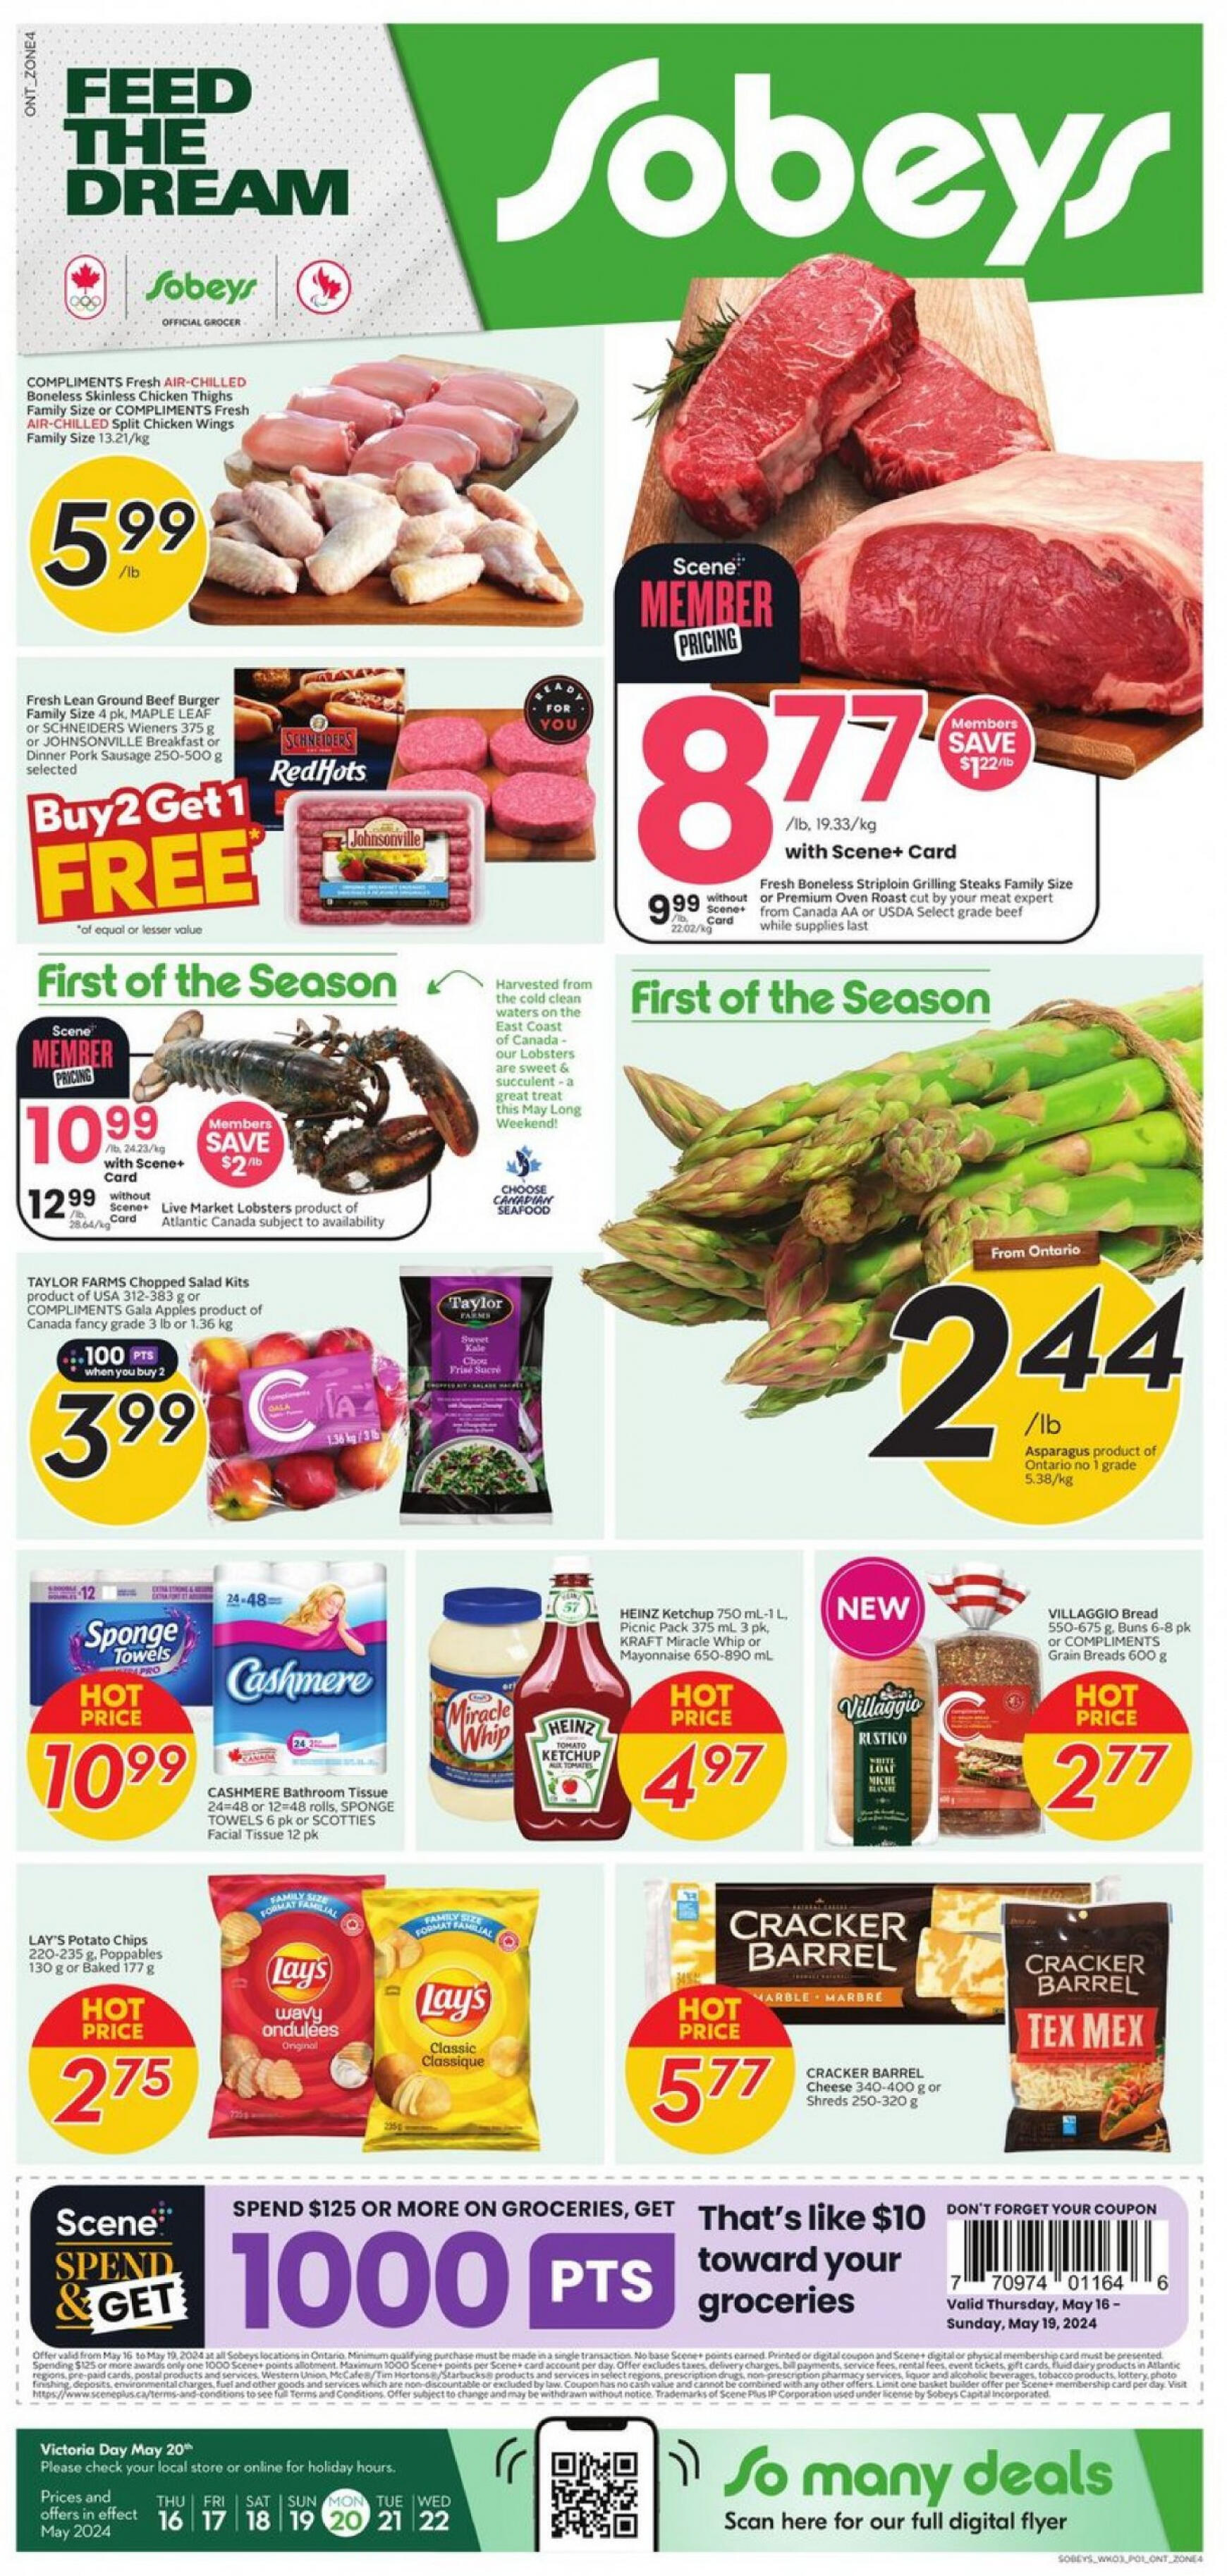 sobeys - Sobeys - Weekly Flyer - Ontario flyer current 16.05. - 22.05. - page: 1